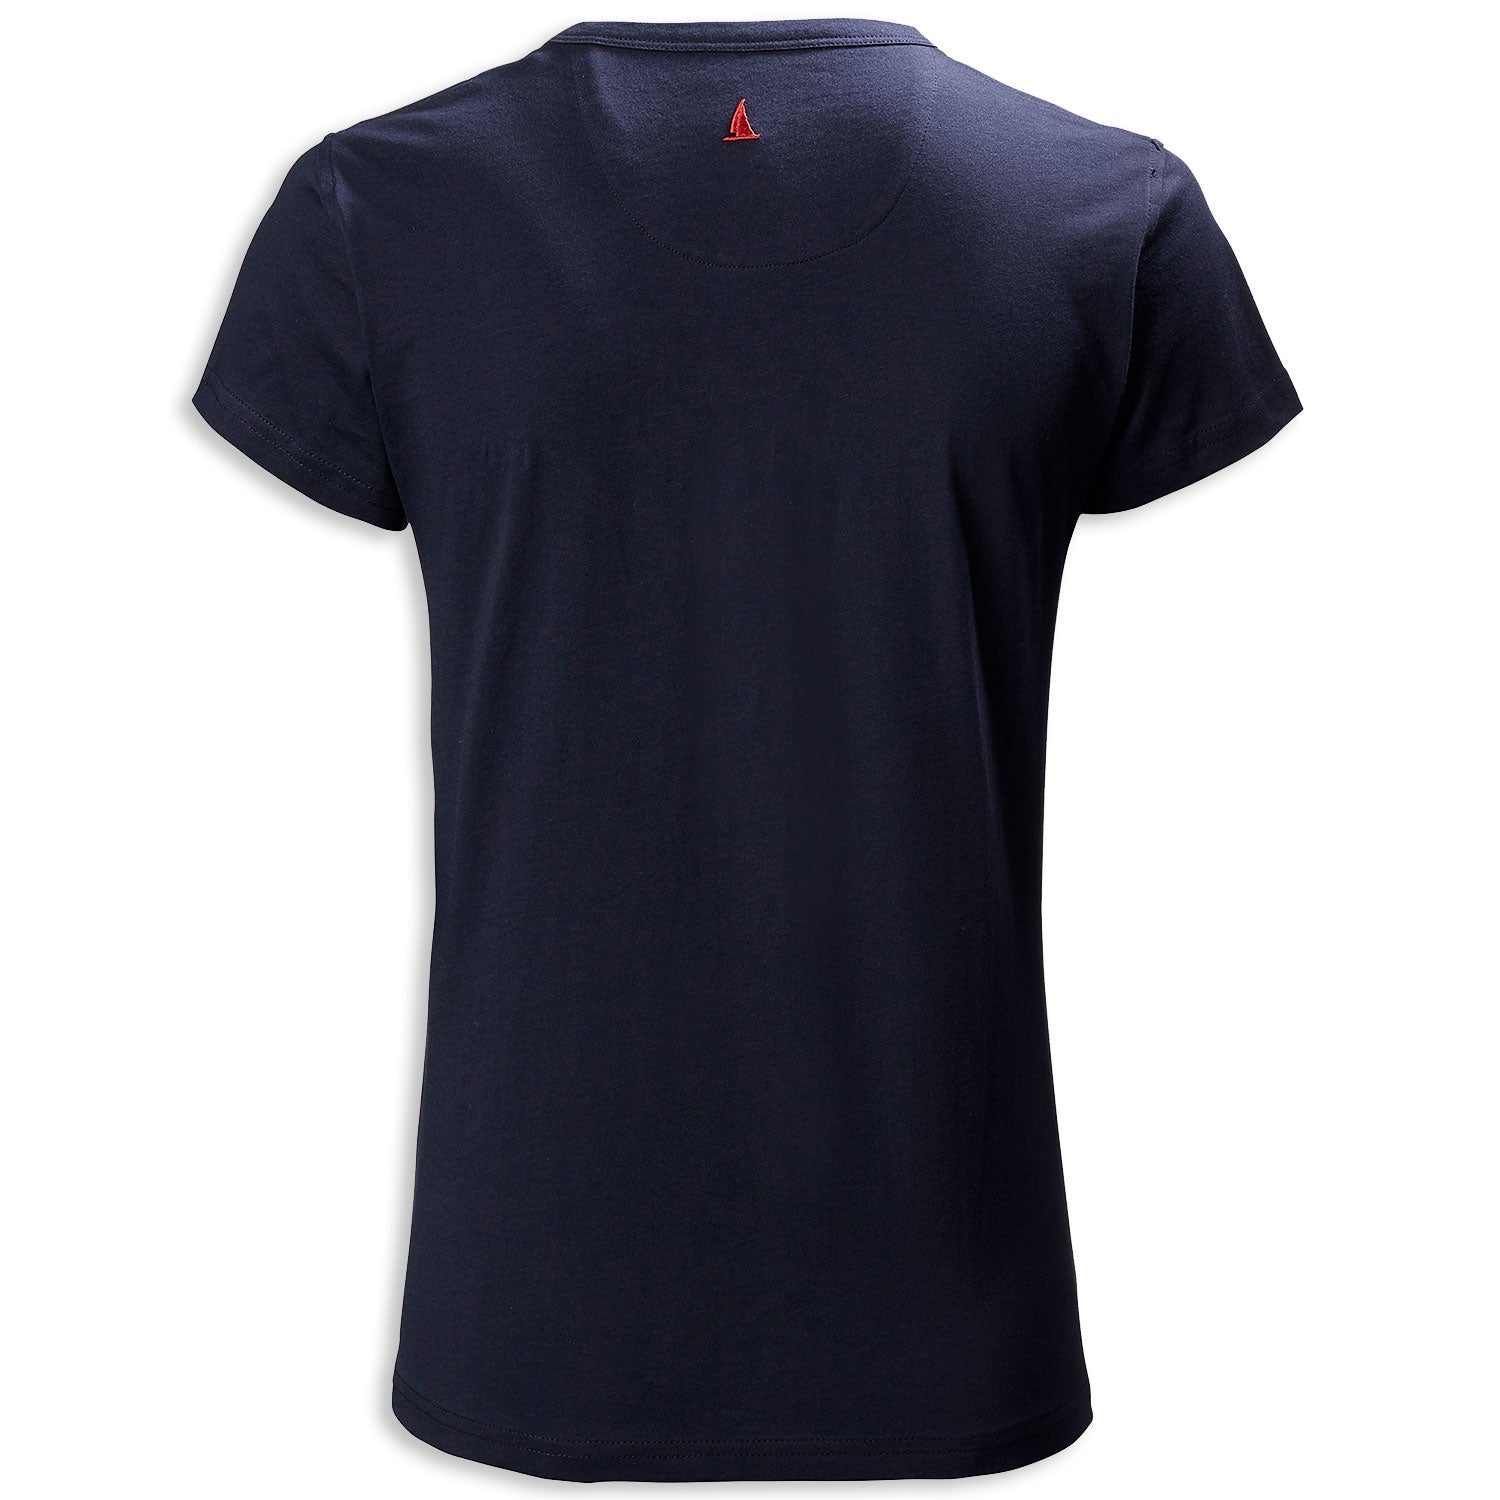 Back Navy with red logo Musto Ladies Favourite T-Shirt